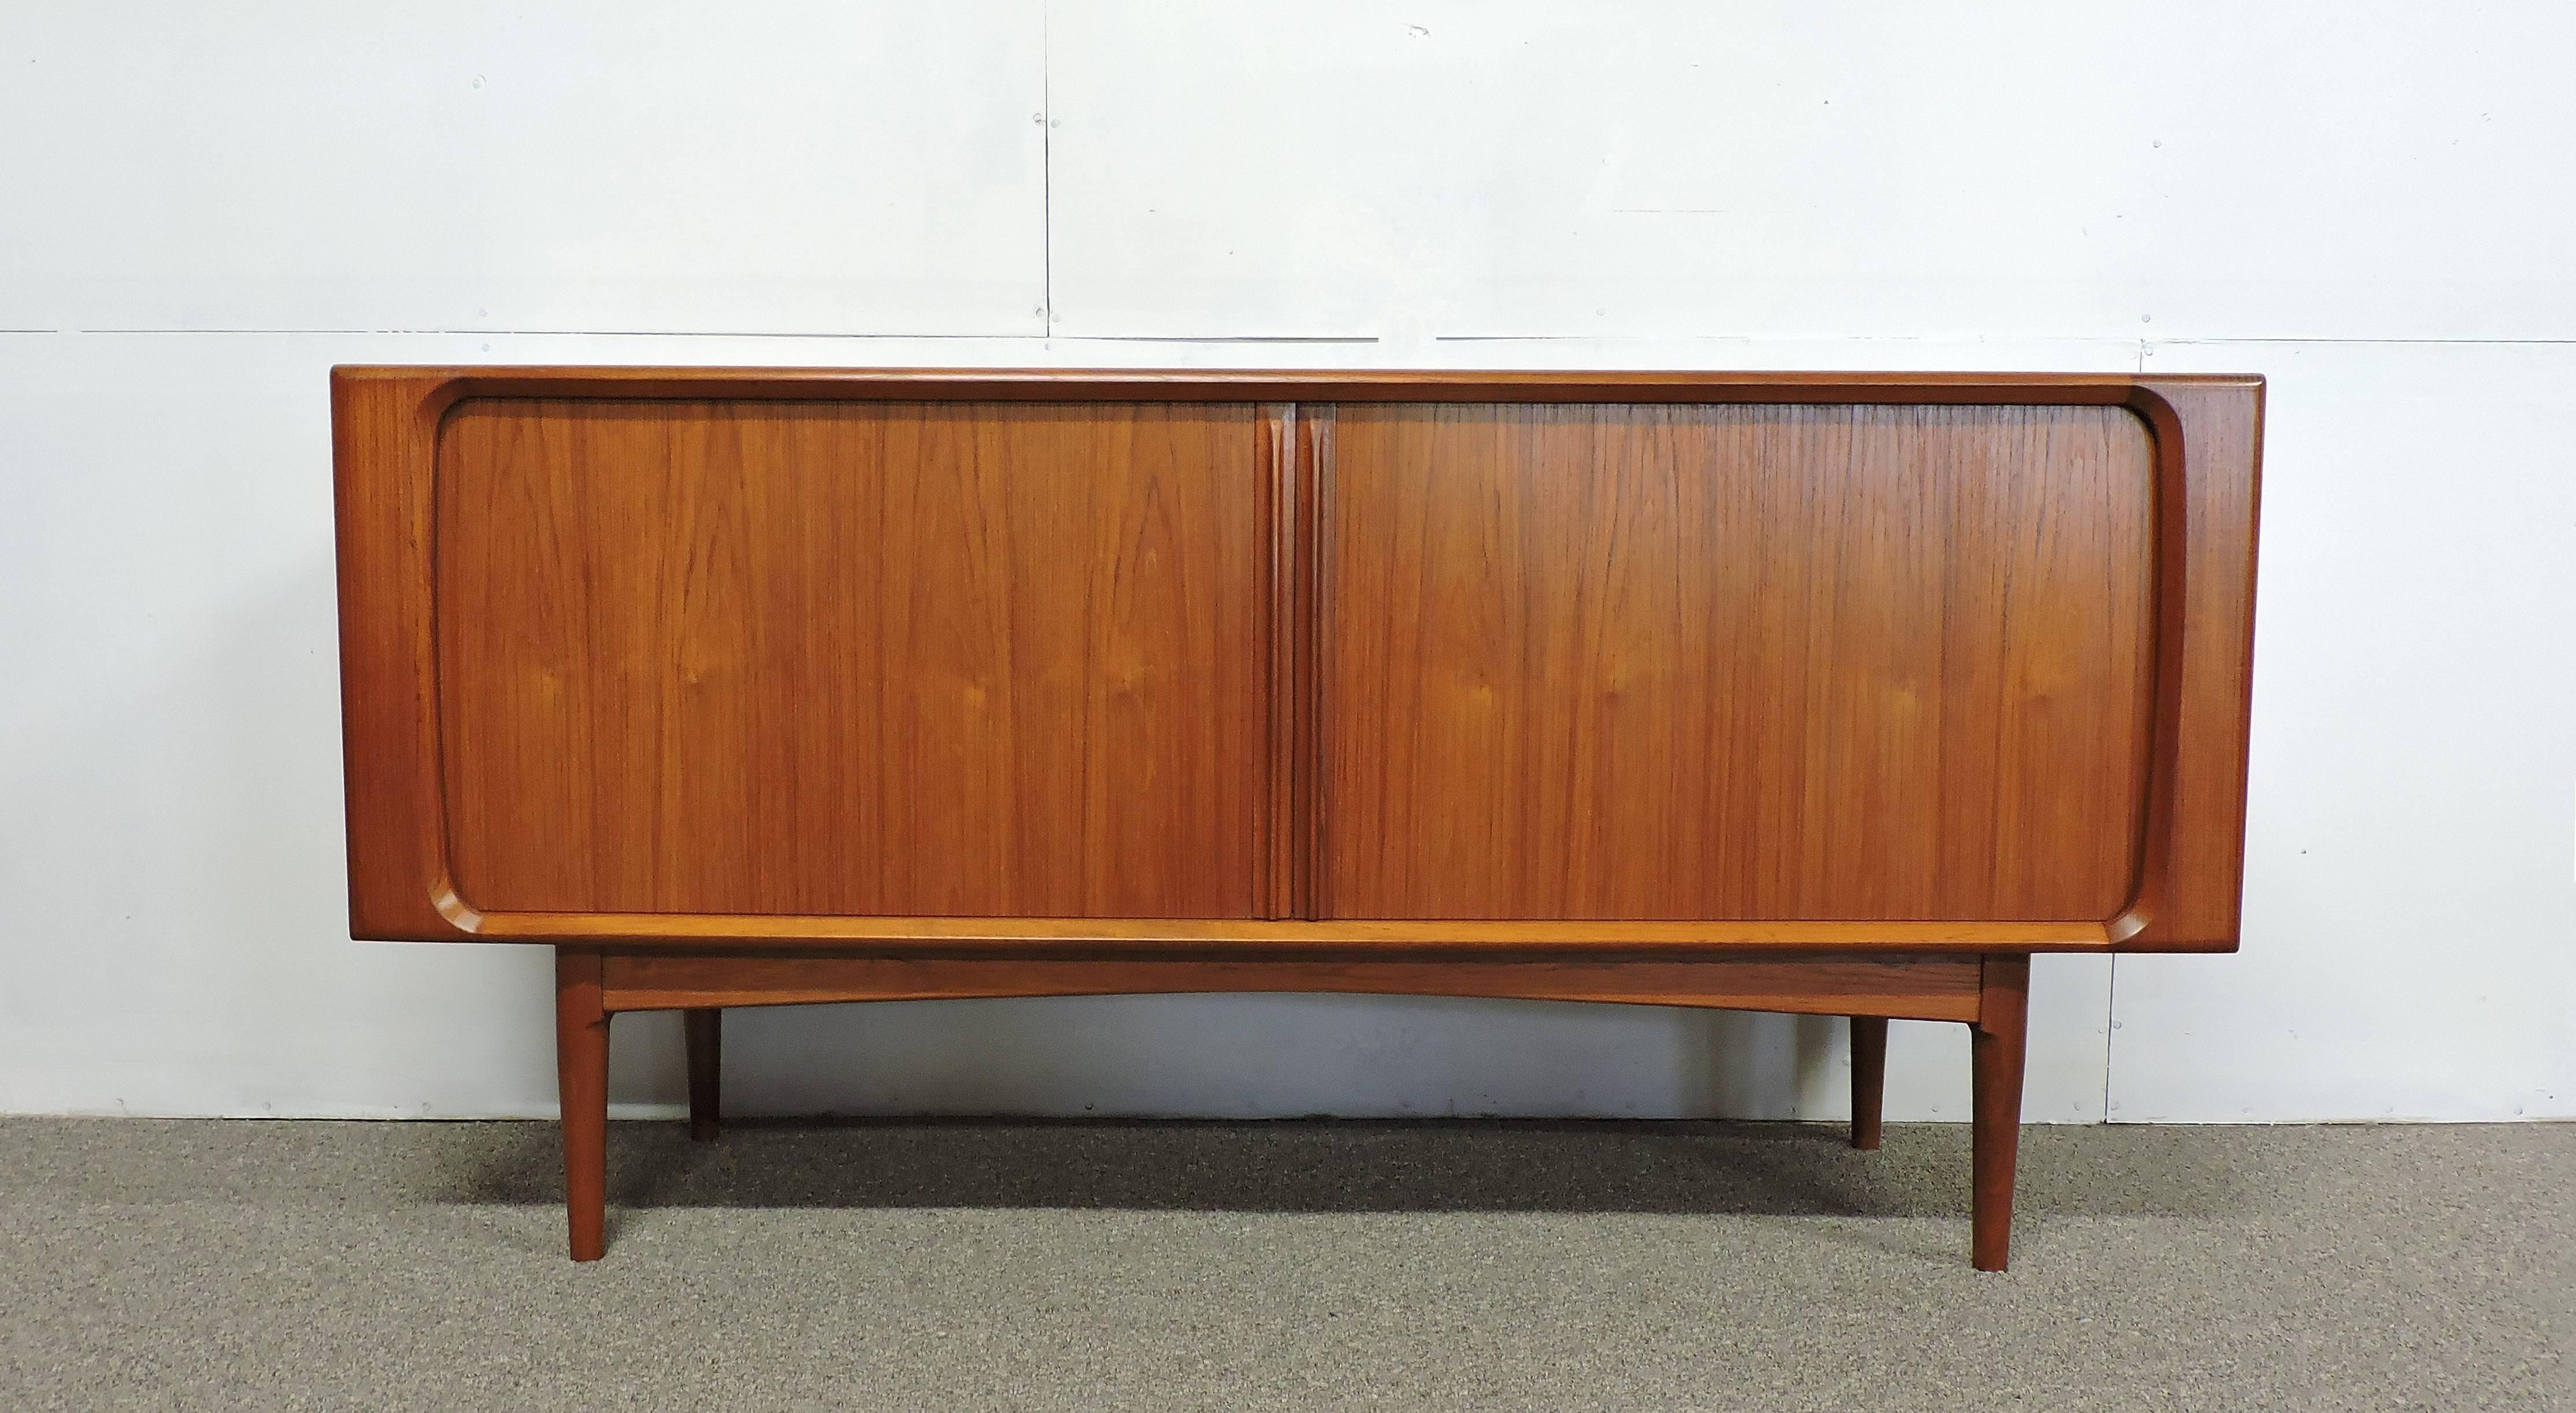 Handsome teak credenza, model 142/65, made in Denmark by Bernhard Pedersen and Son.
This high quality cabinet has tambour doors with sleek sculpted teak pulls which open to reveal three drawers and three adjustable shelves. It sits on tapered legs